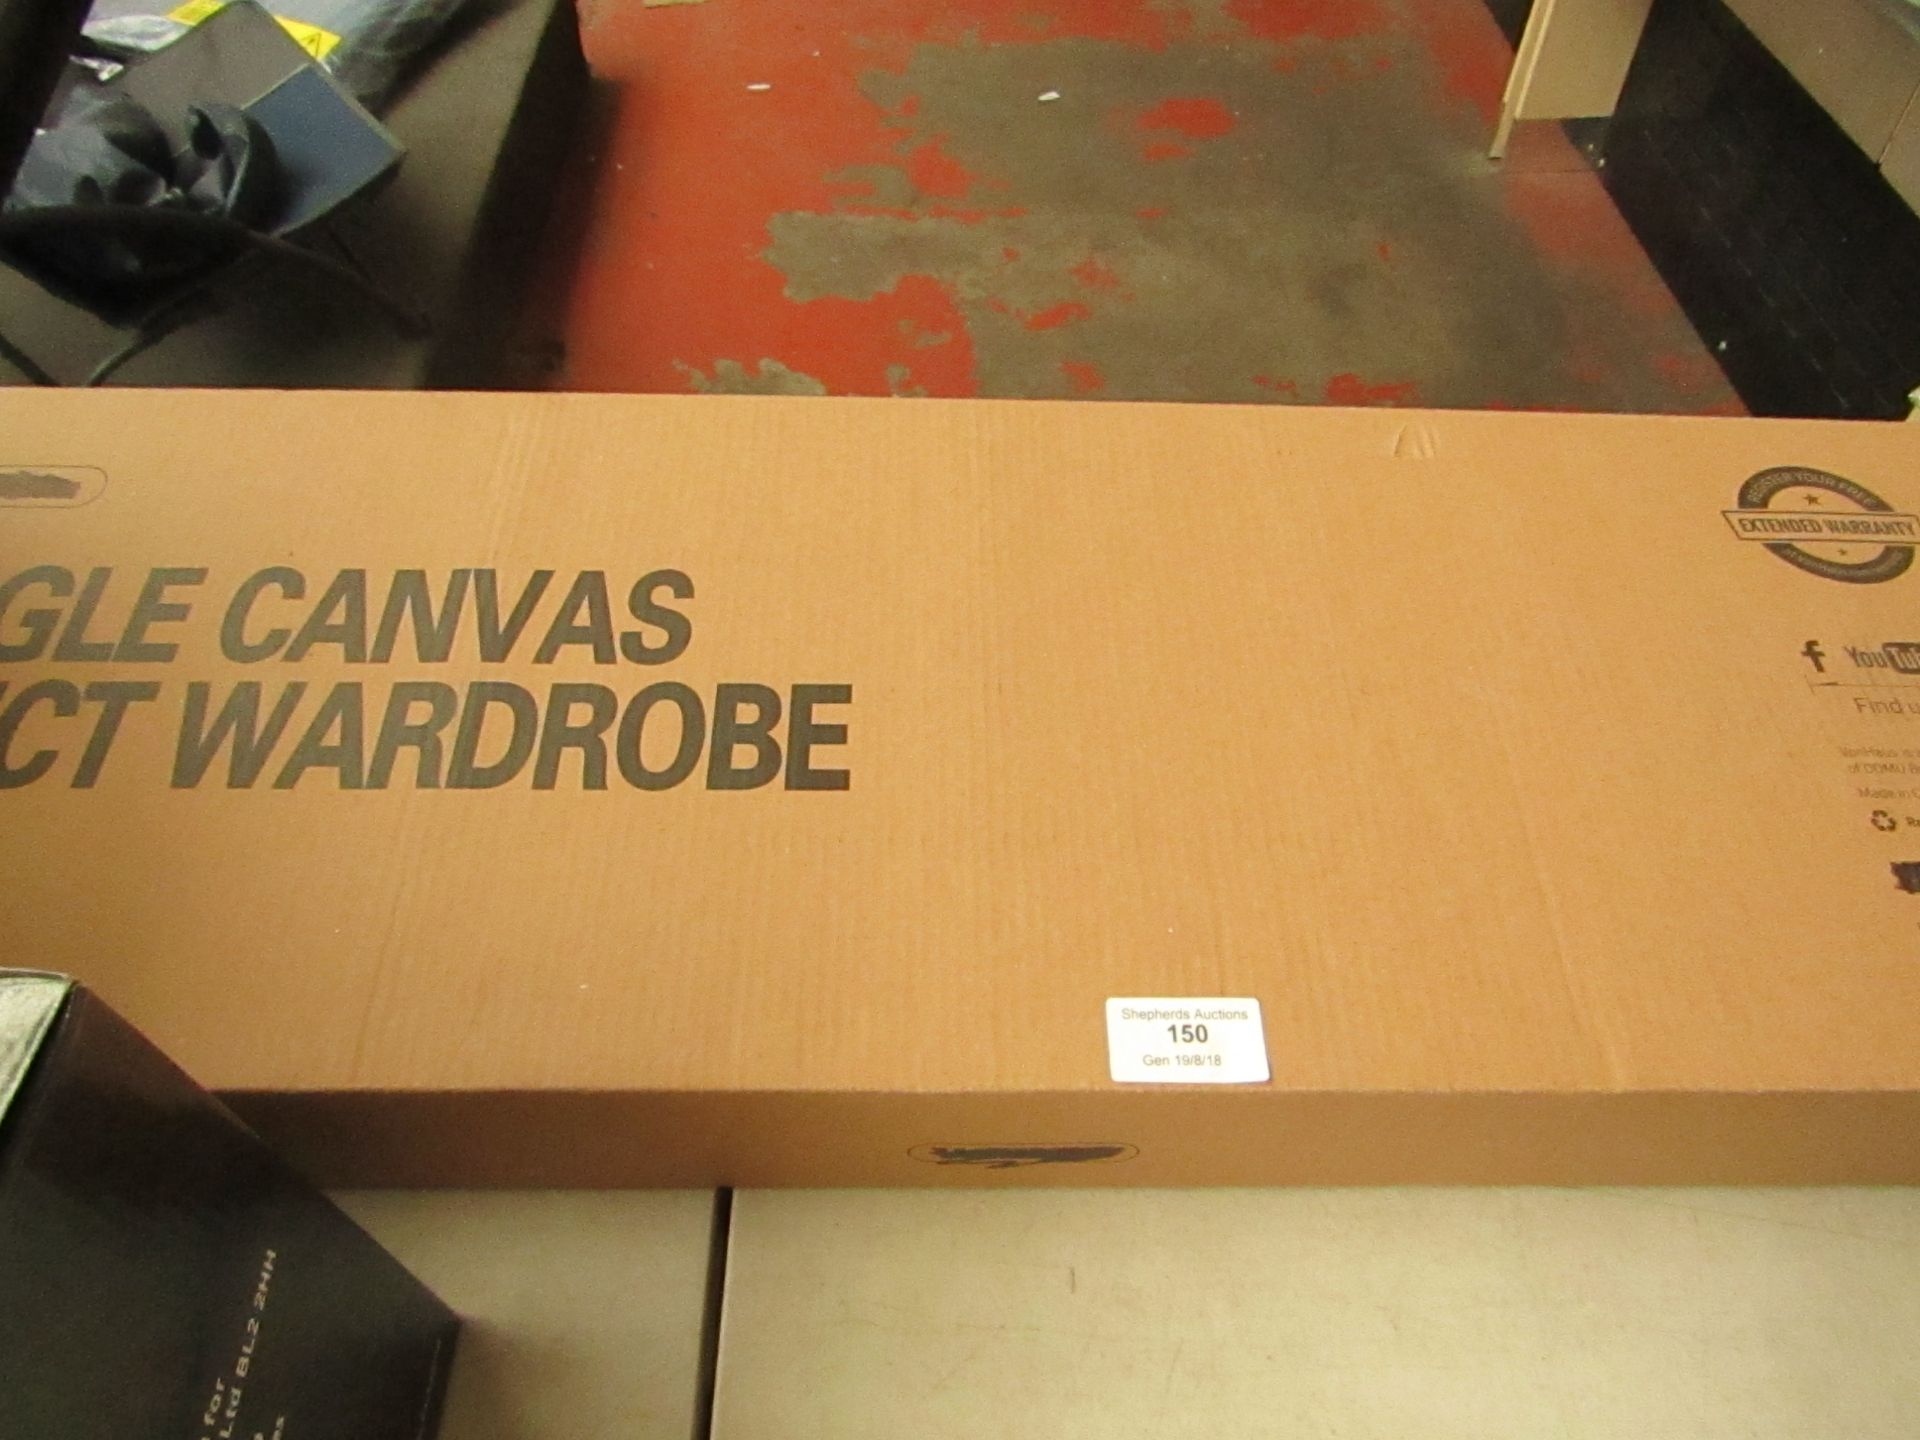 Single canvas effect wardrobe, unchecked and boxed. Please note by Bidding on this item you agree to - Image 2 of 2